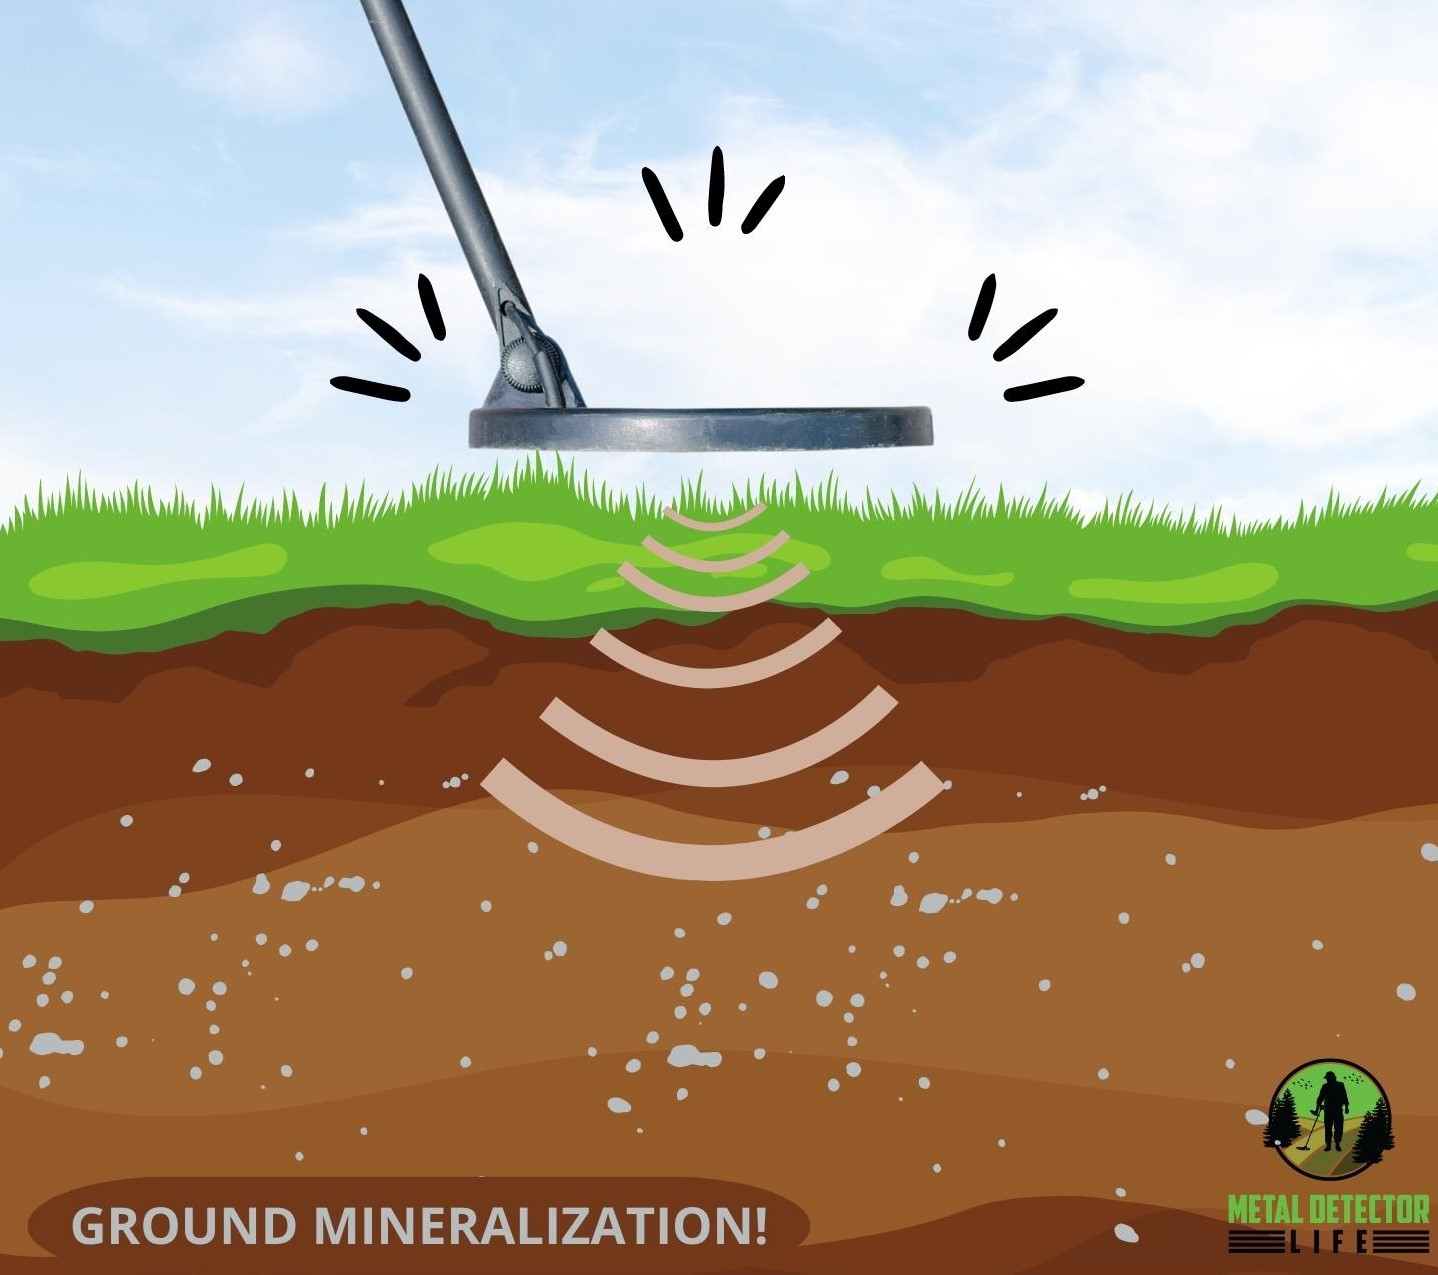 The metal detector reacts to ground mineralization. Therefore, it is really important to properly ground balance the metal detector. 